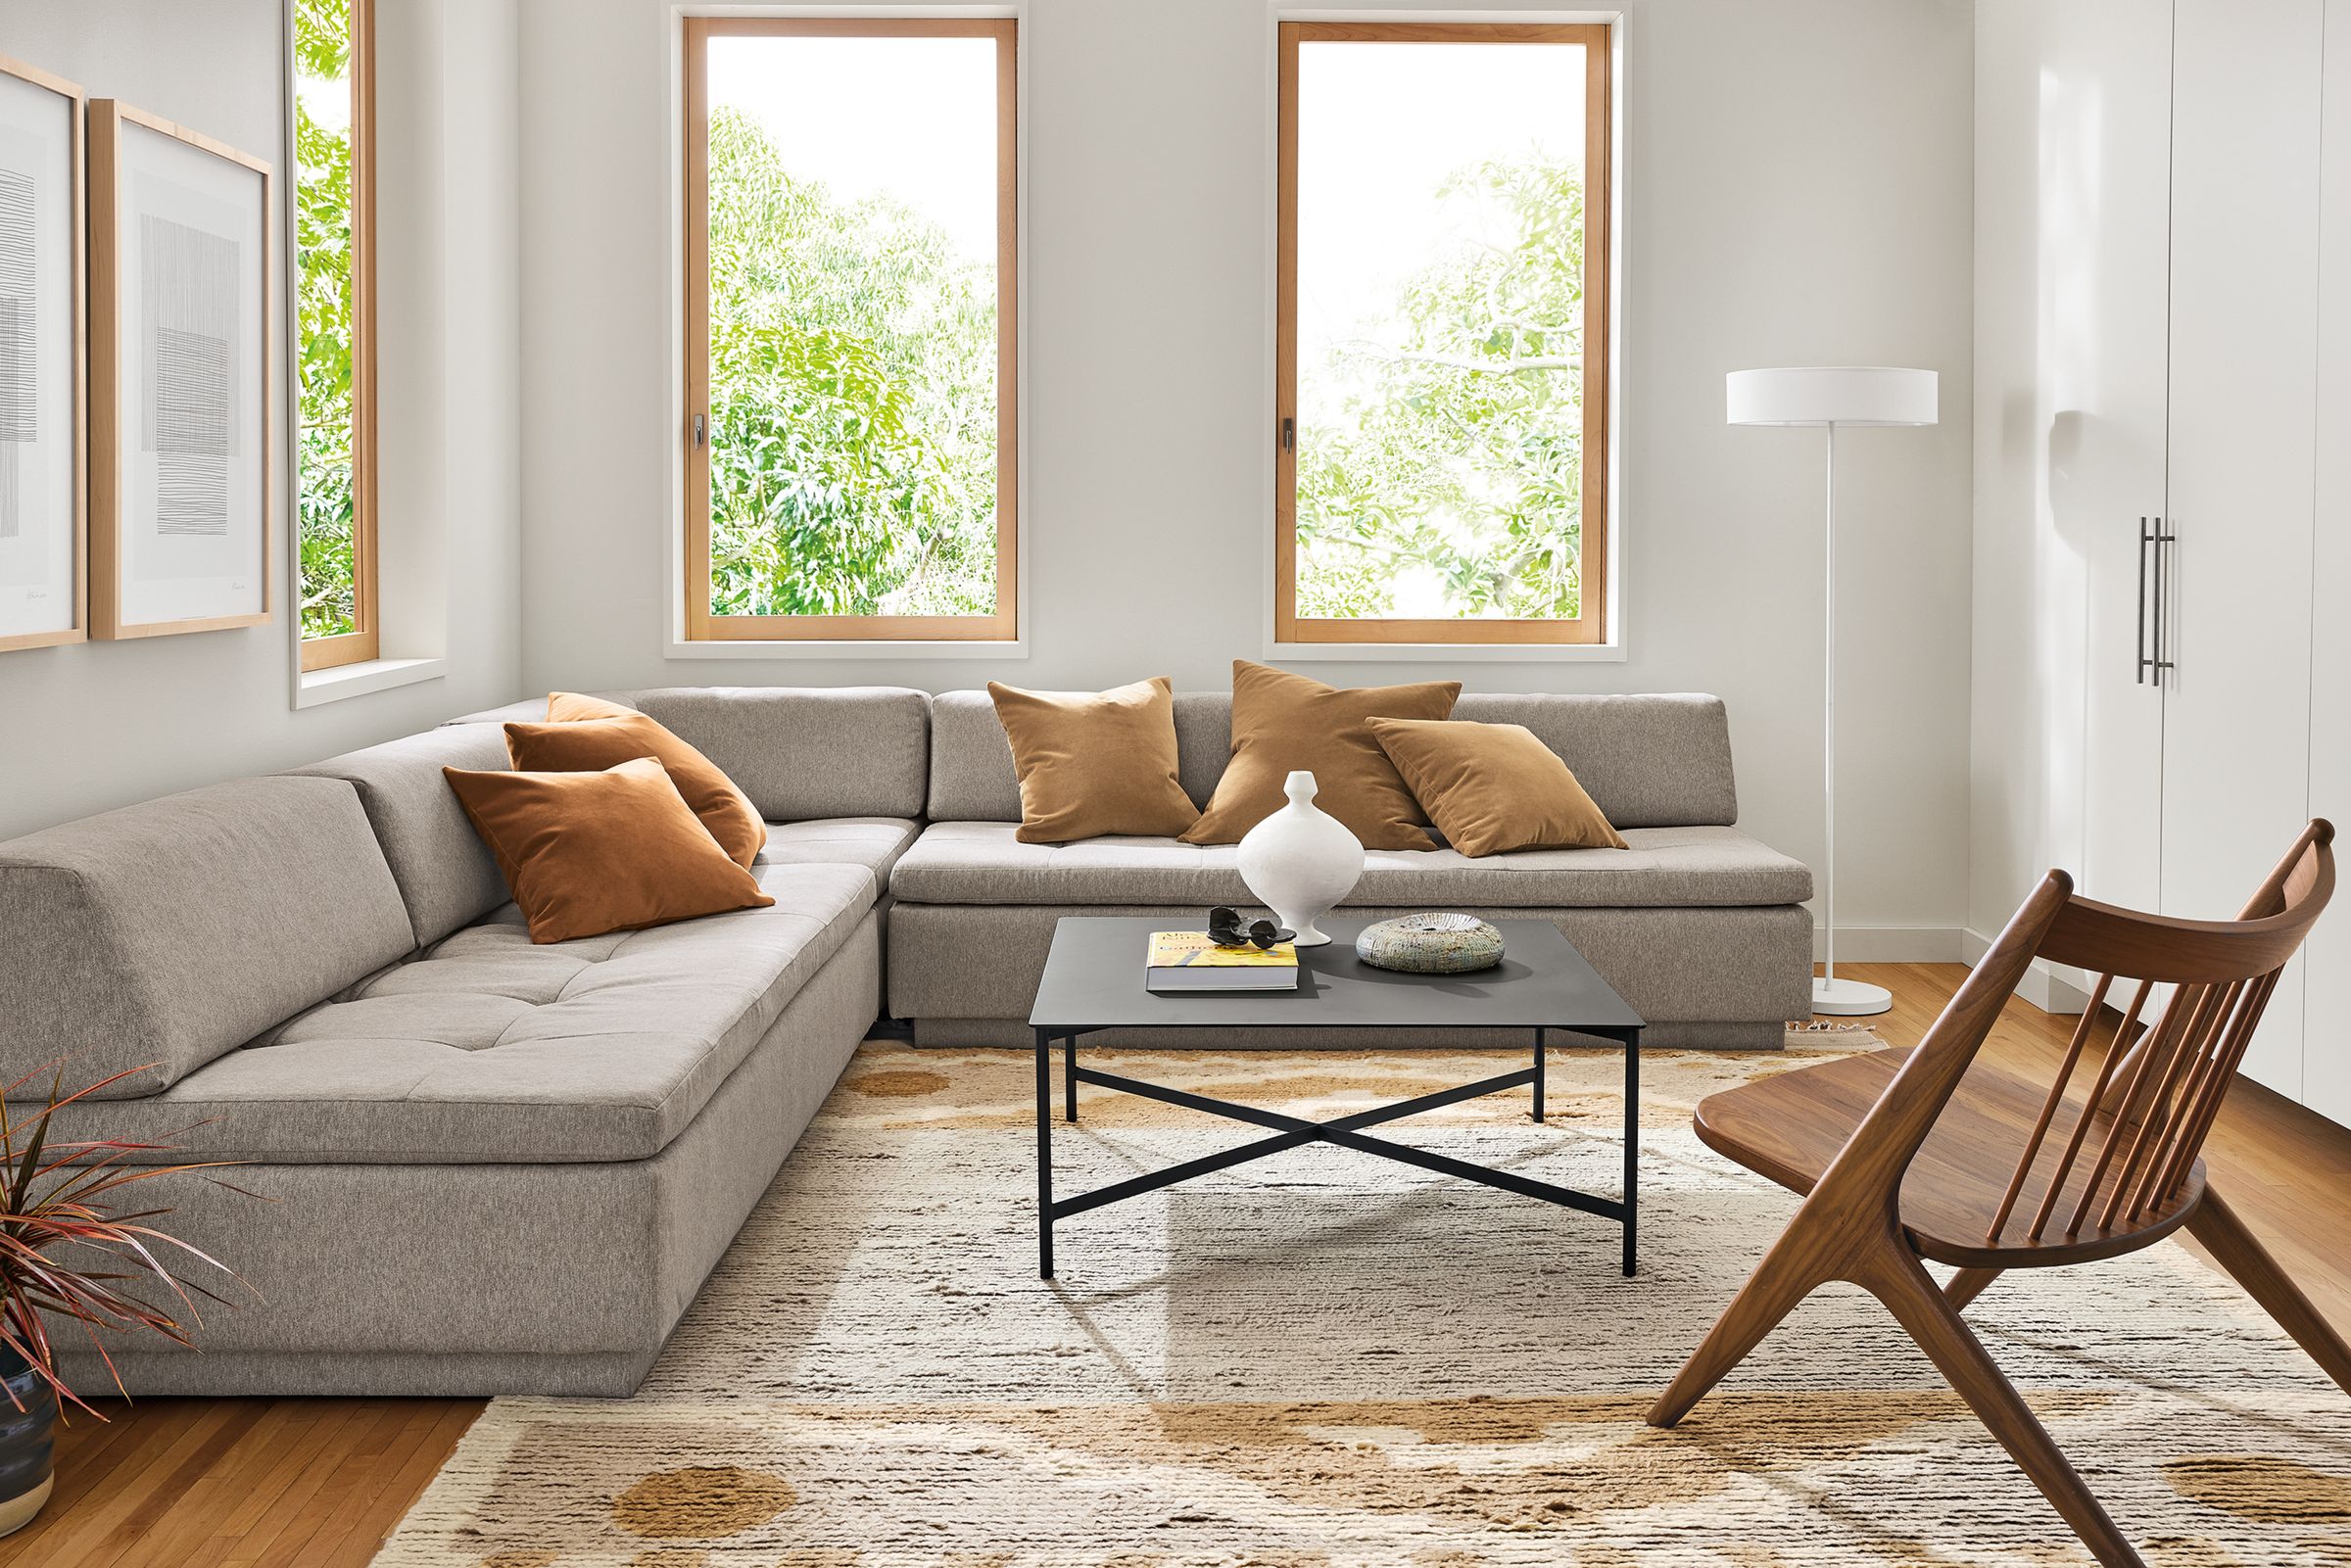 Living area with Miranda Sectional in Elin Cement fabric, Circuit coffee table, Oskar chair in walnut and Tova rug in sand.